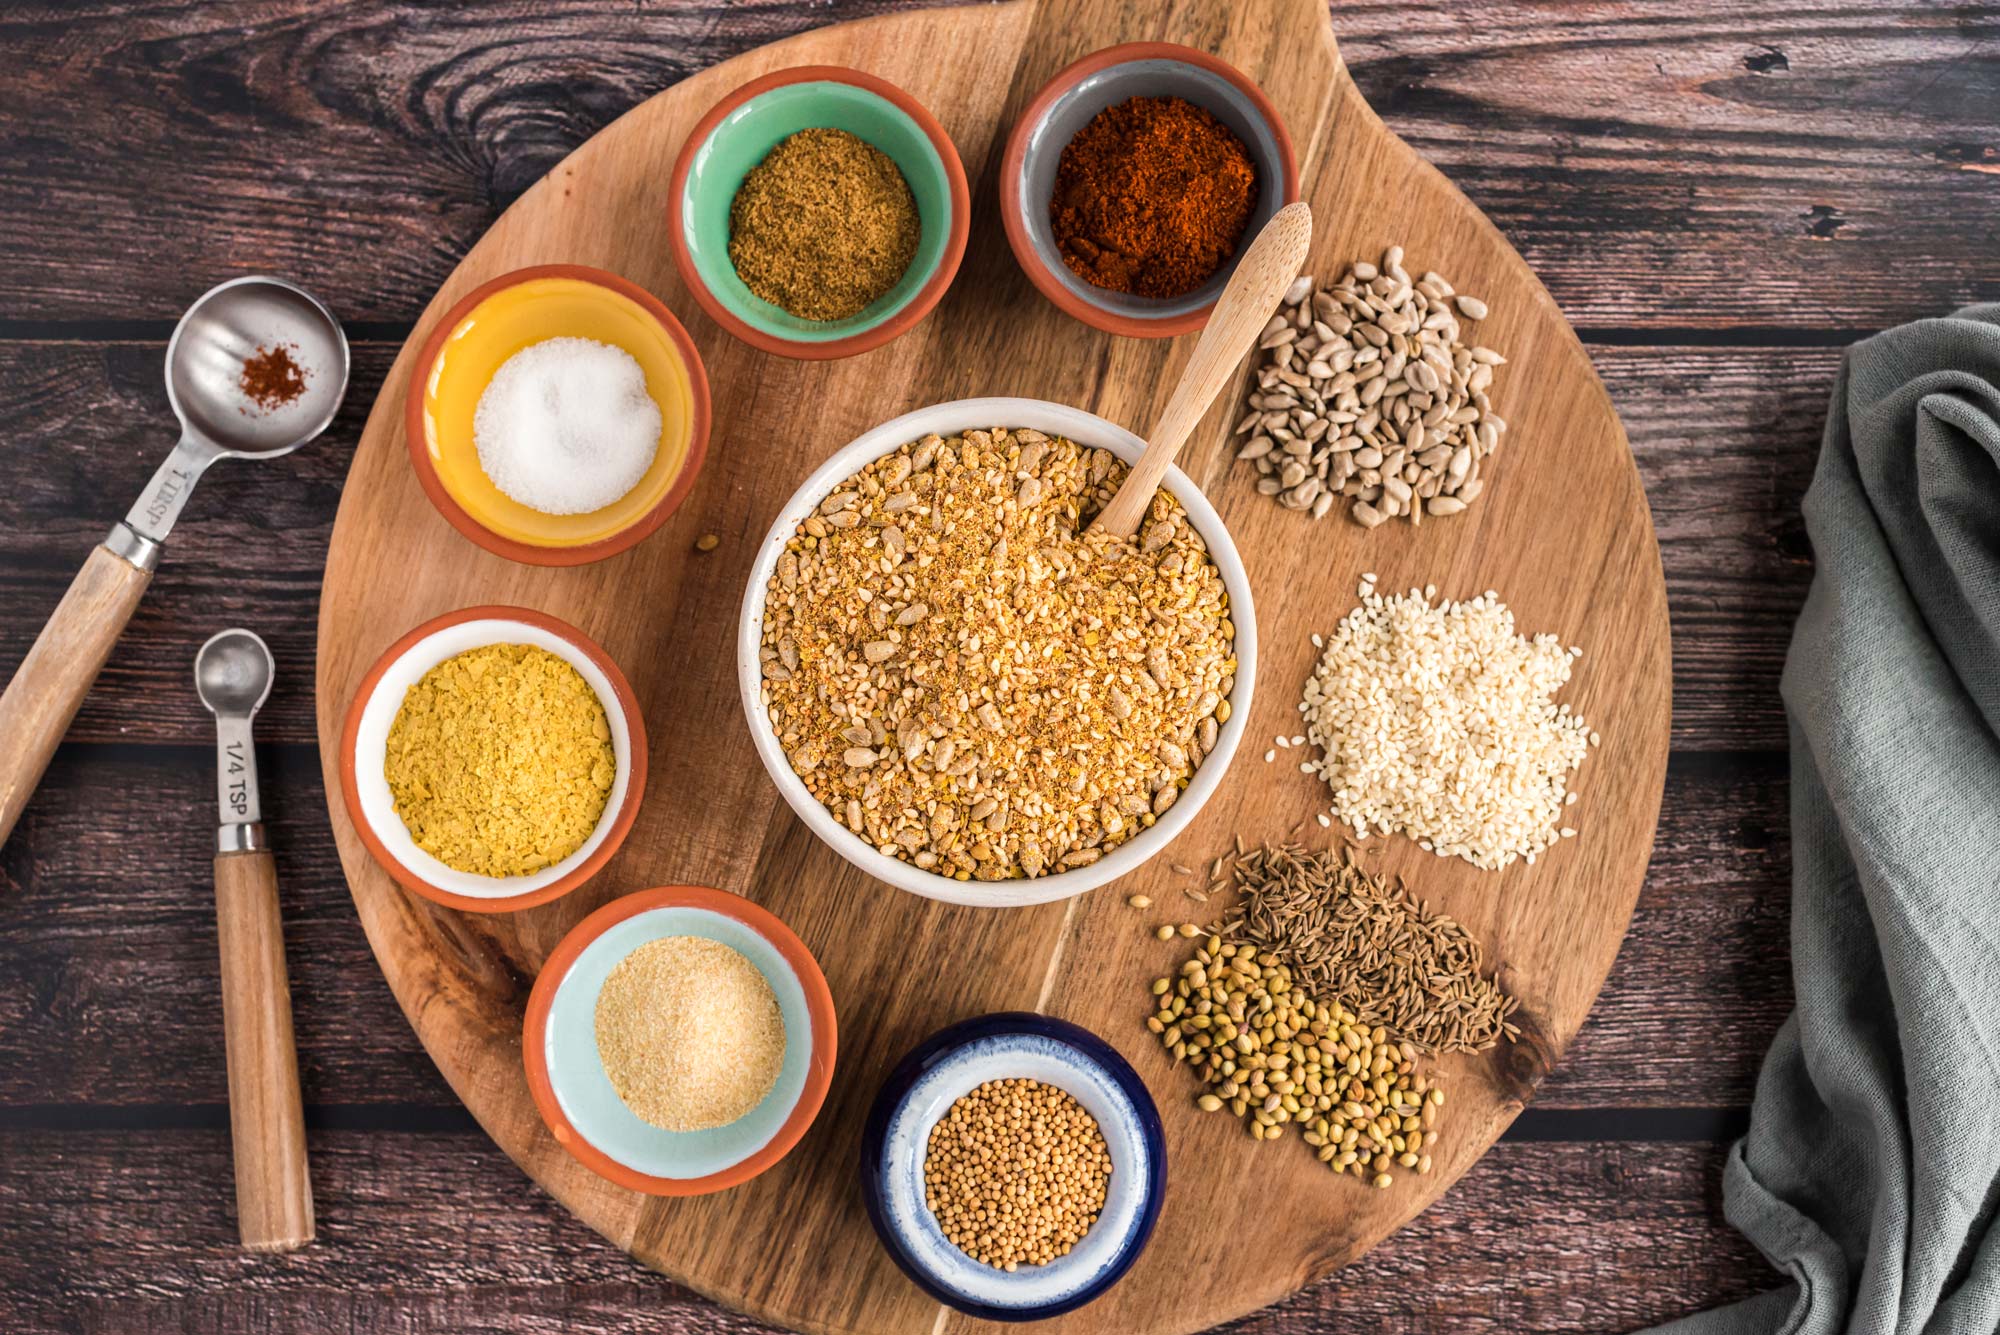 healthy dining: toasted spice blend with ingredients in bowls on board